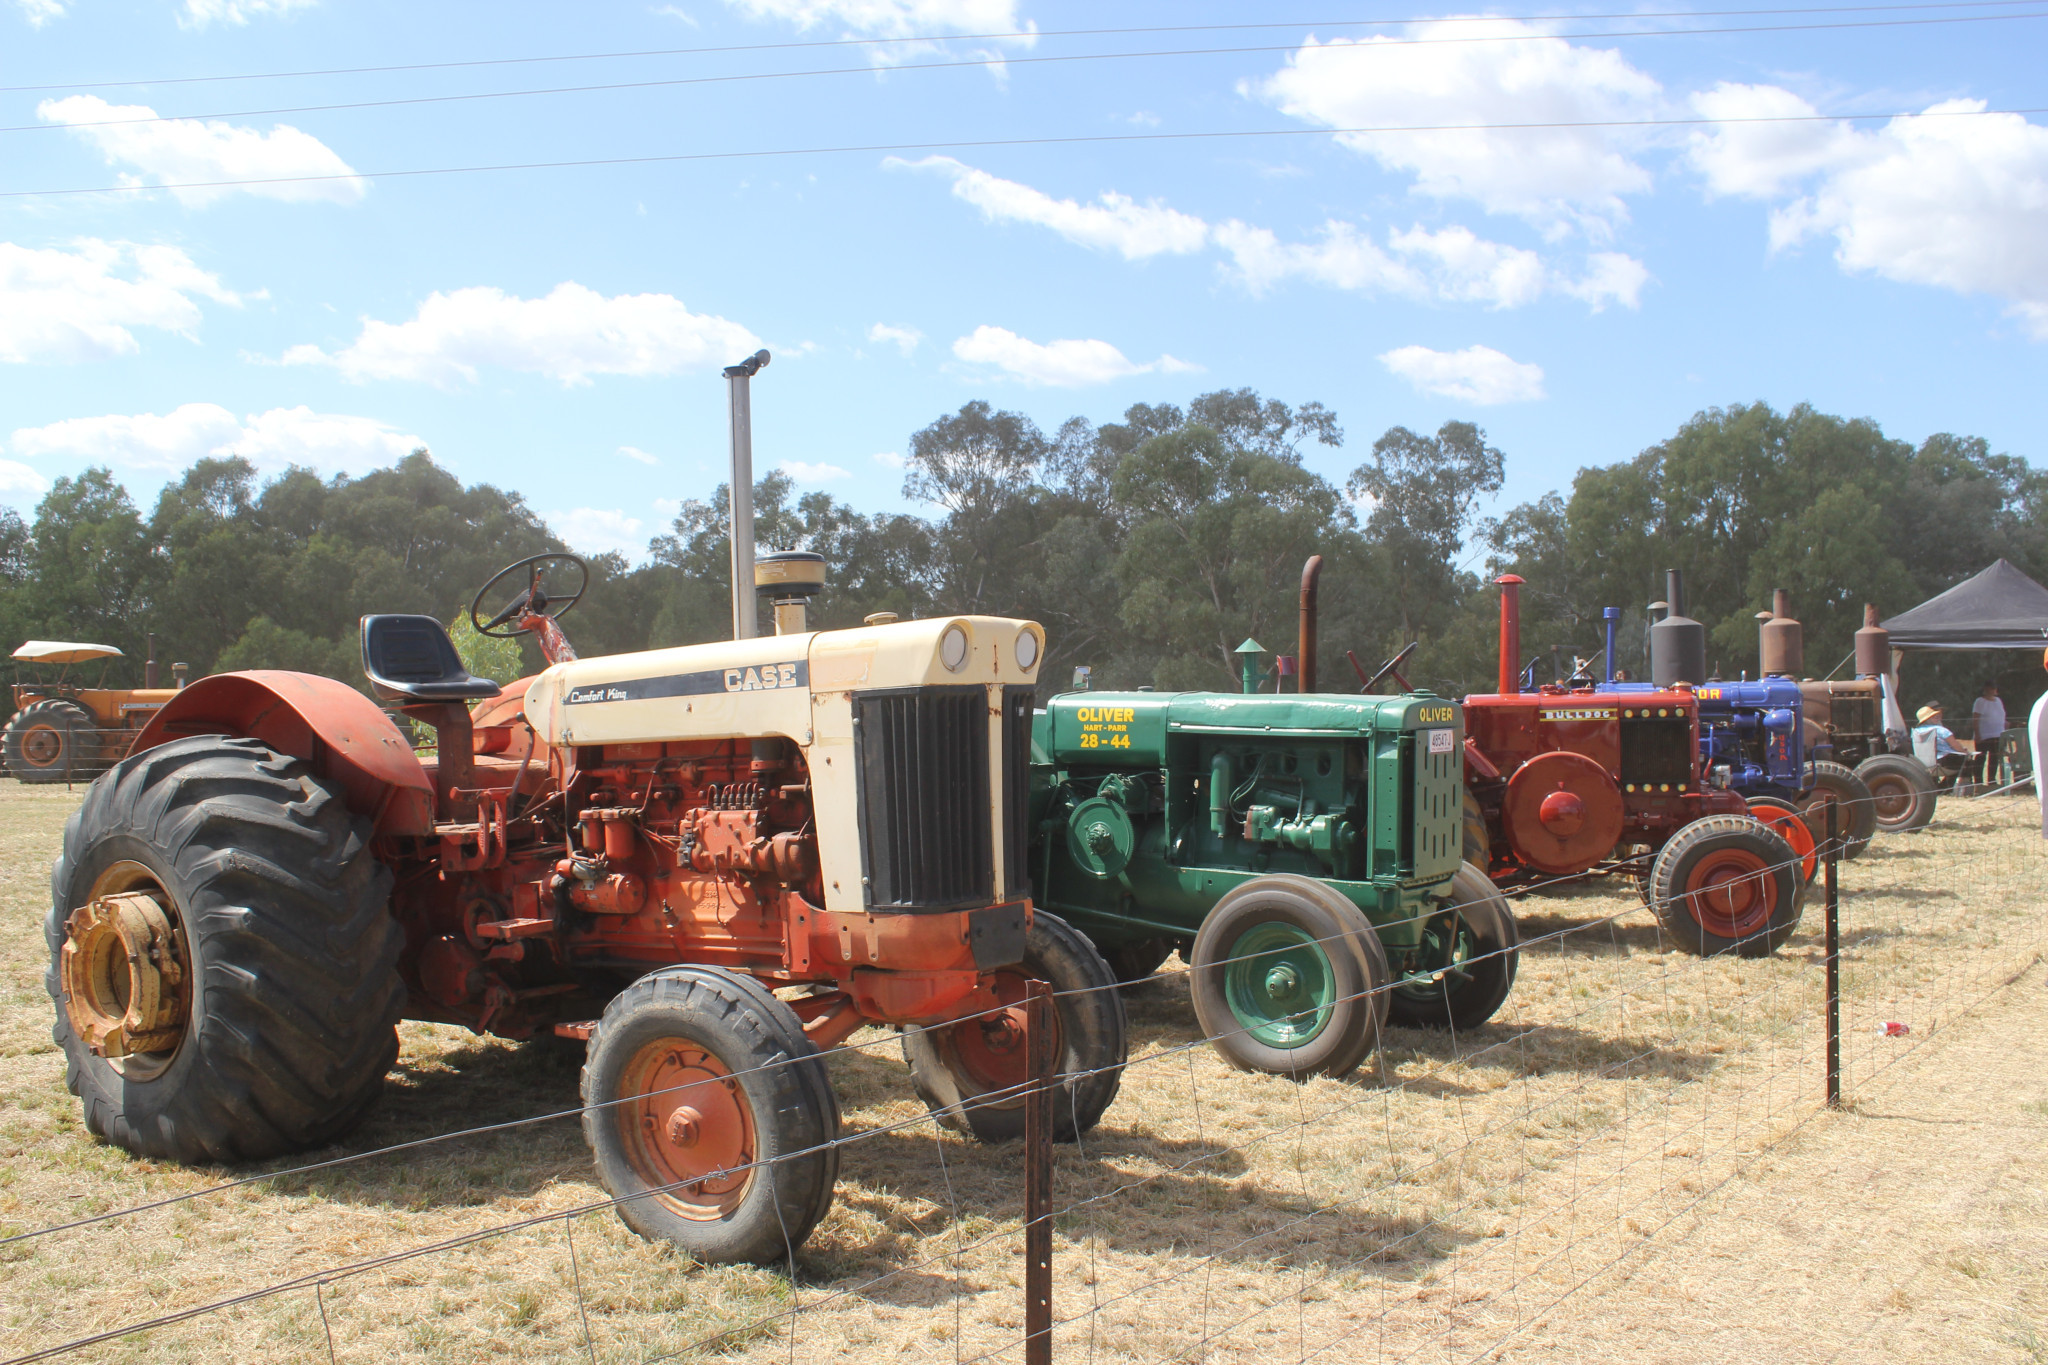 A vast selection of tractors were on display throughout the day - some refurbished and some in their more original state.